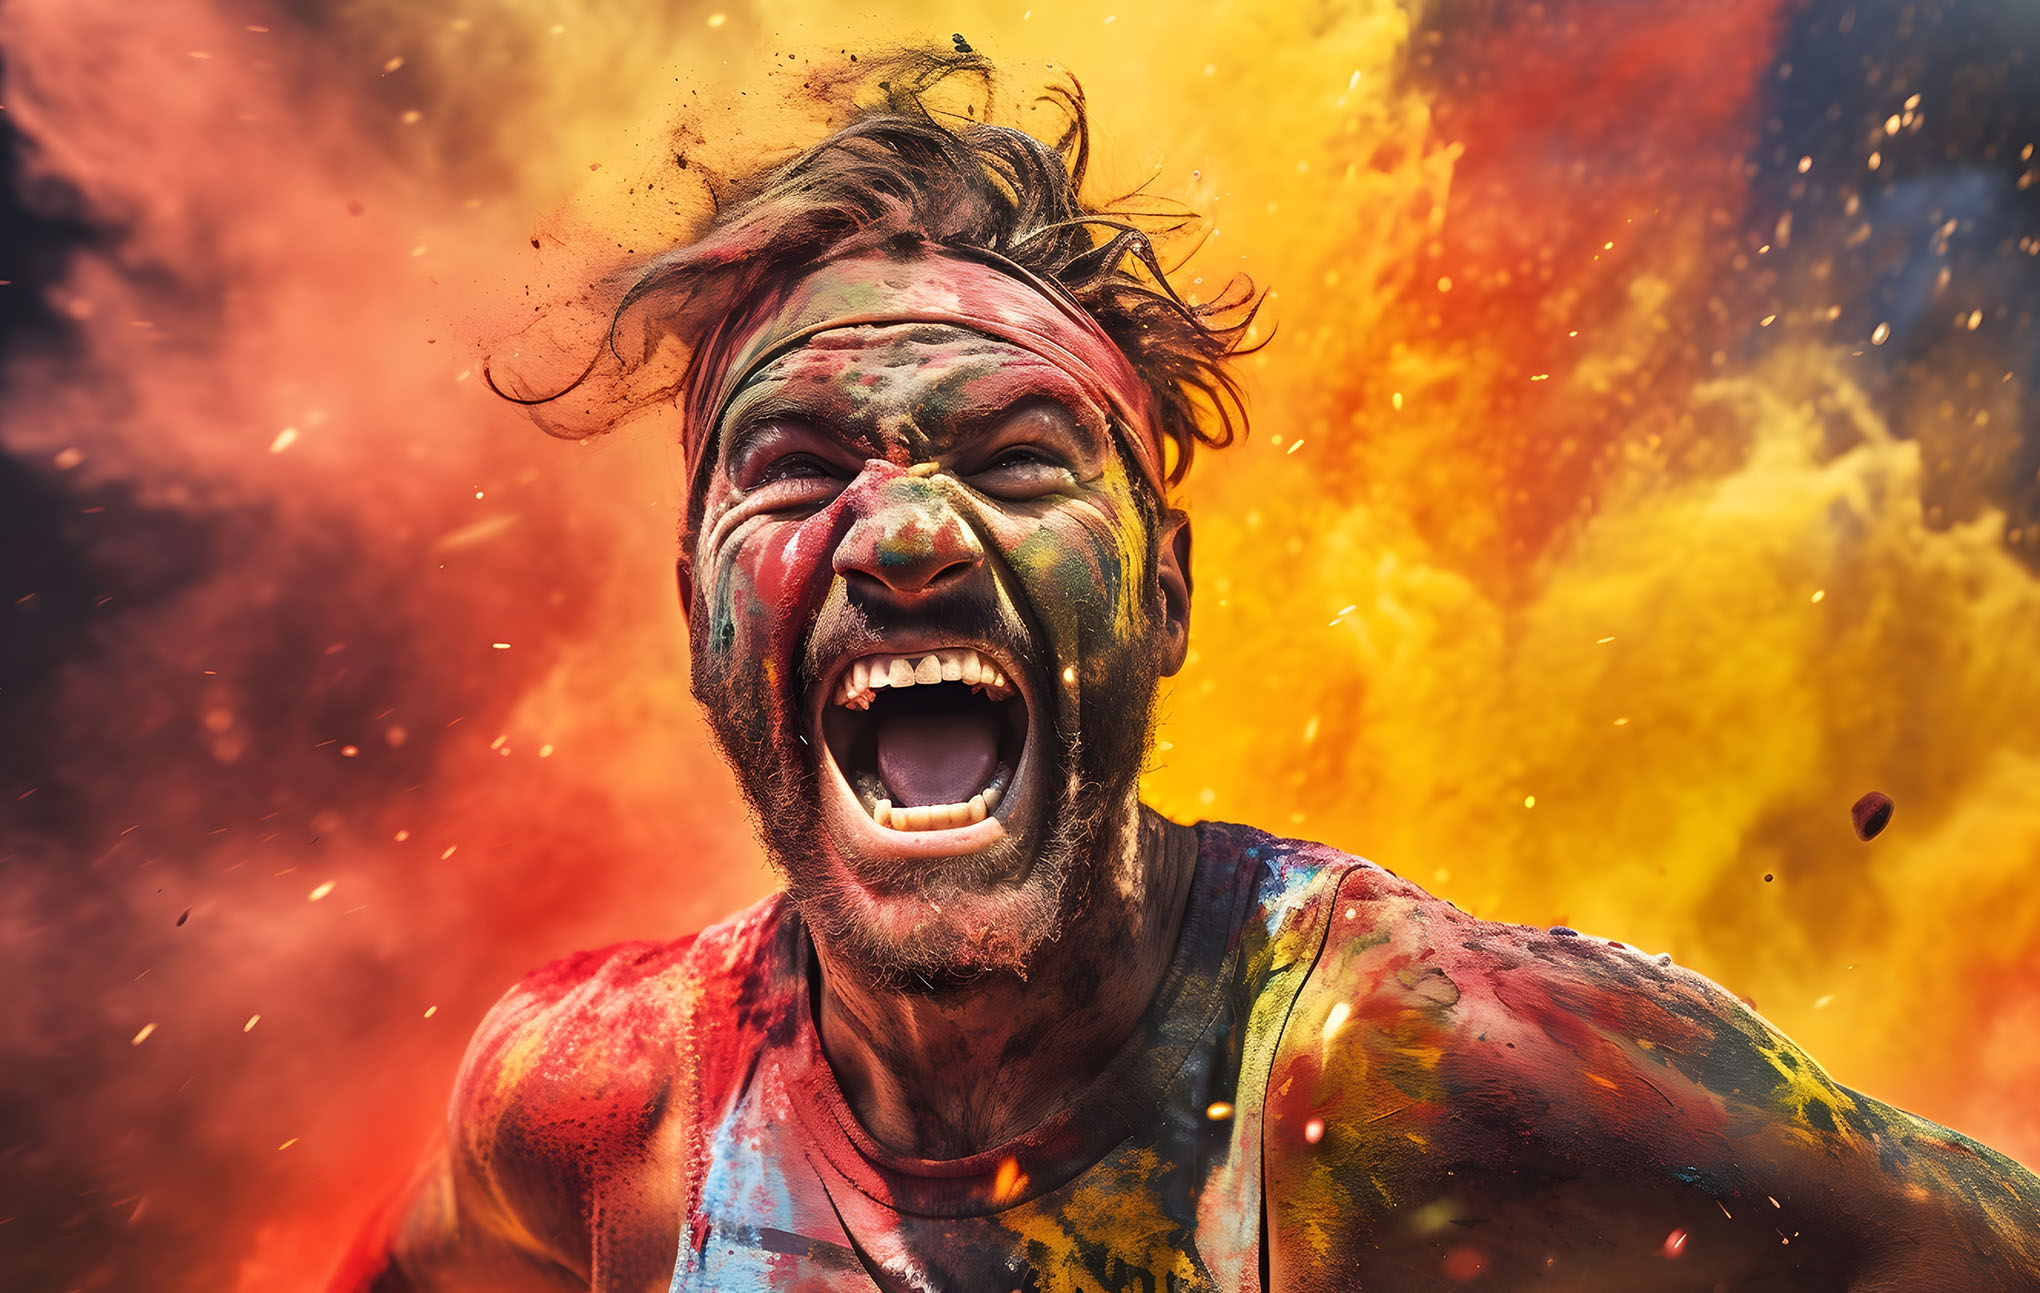 A man covered in colorful powders yells energetically, with a vivid explosion of red and orange colors in the background, conveying a dynamic and intense emotional expression.